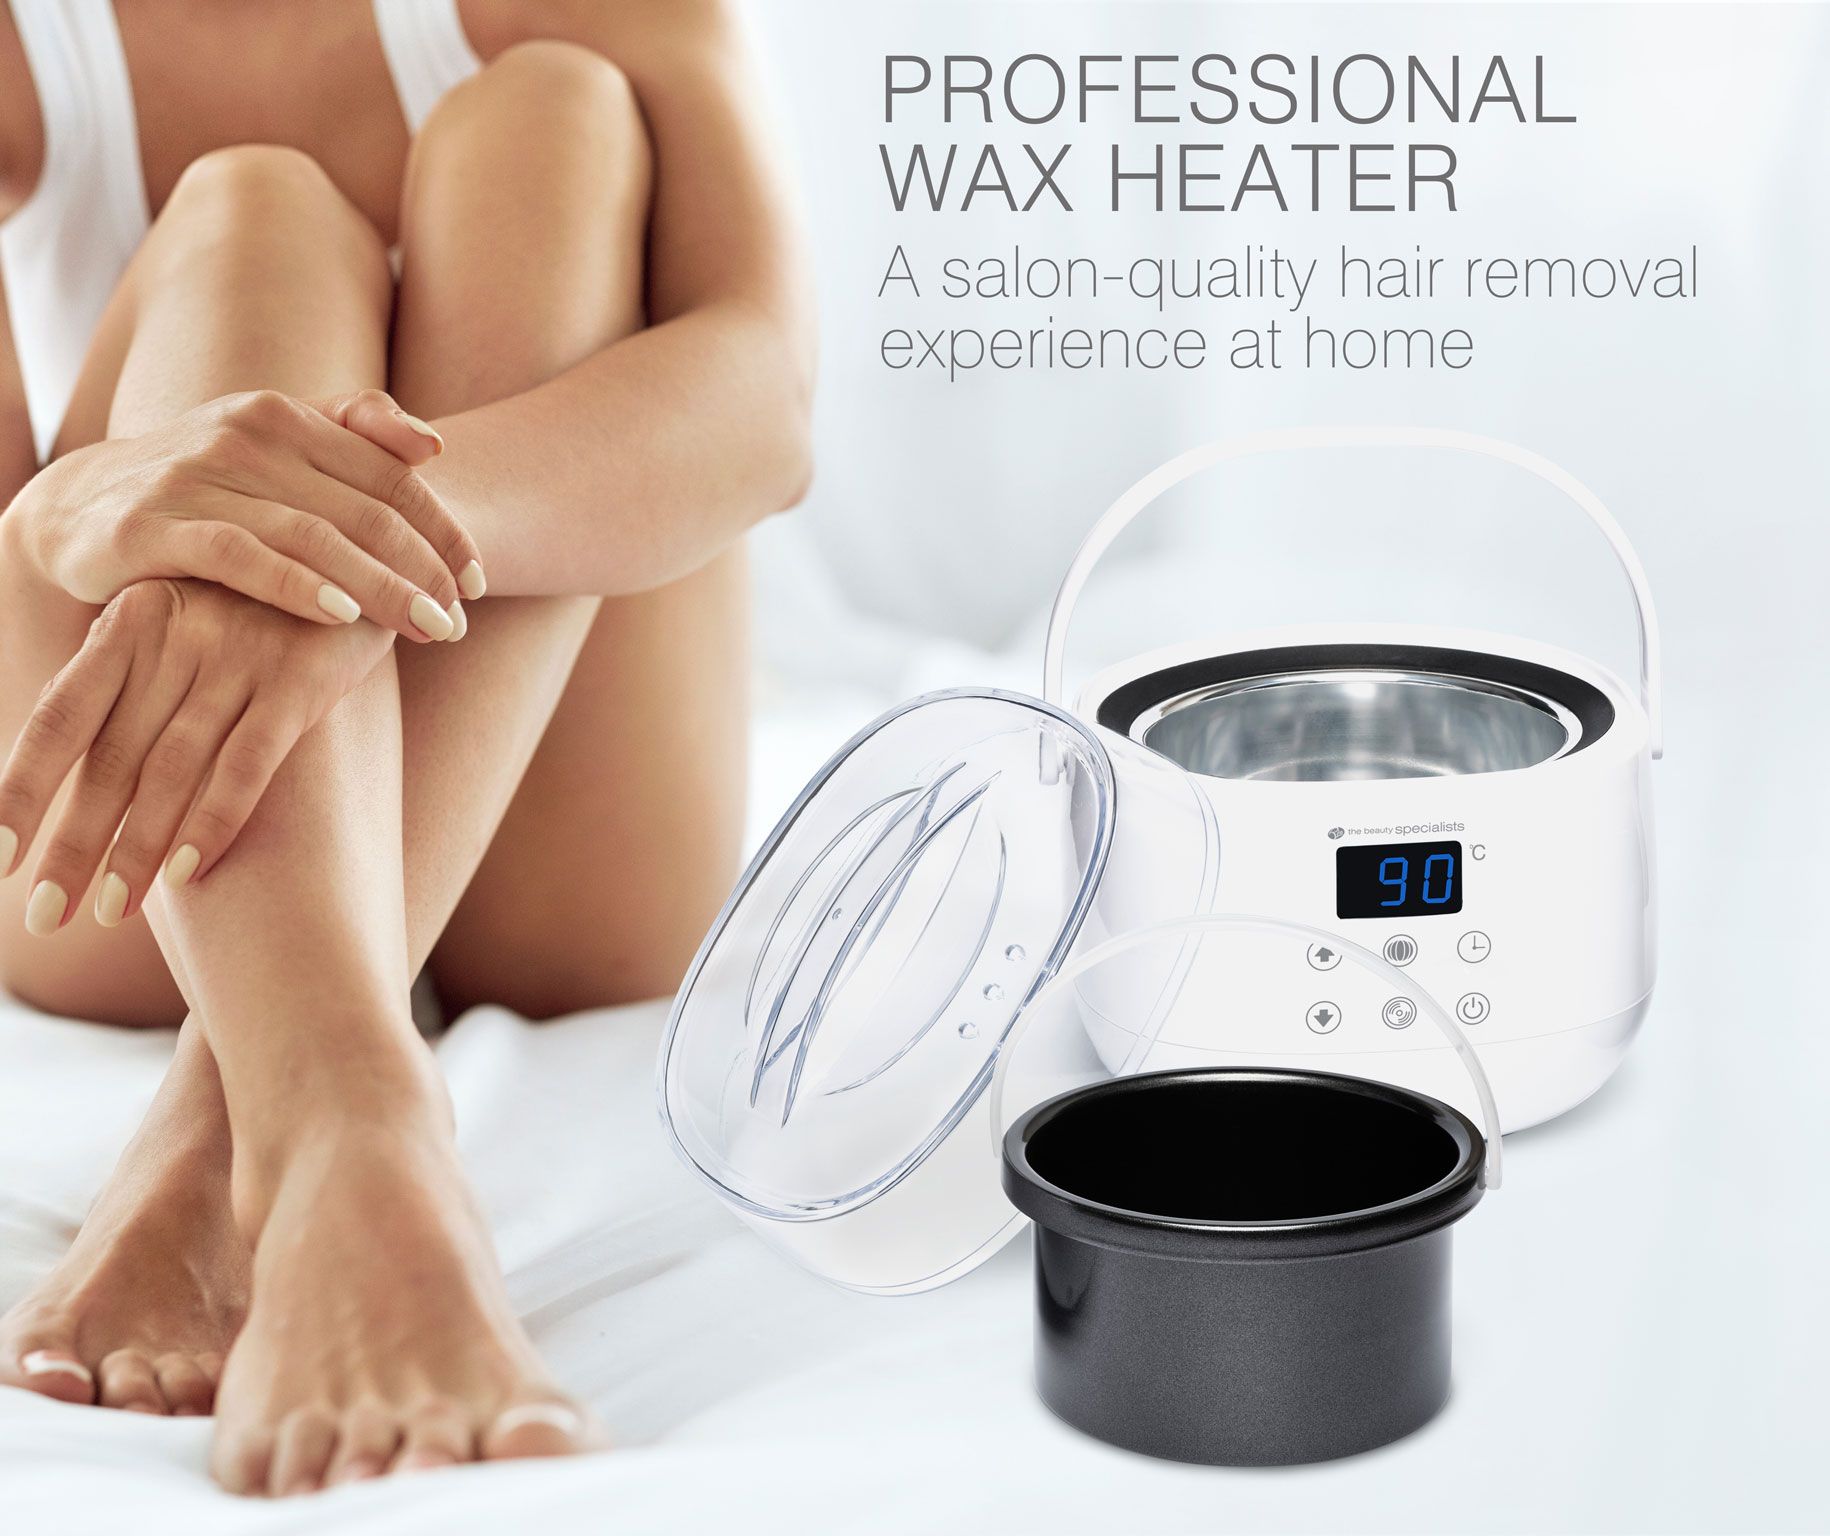 Professional wax heater ontop of image of ladies smooth legs captioned a salon-quality hair removal experience at home